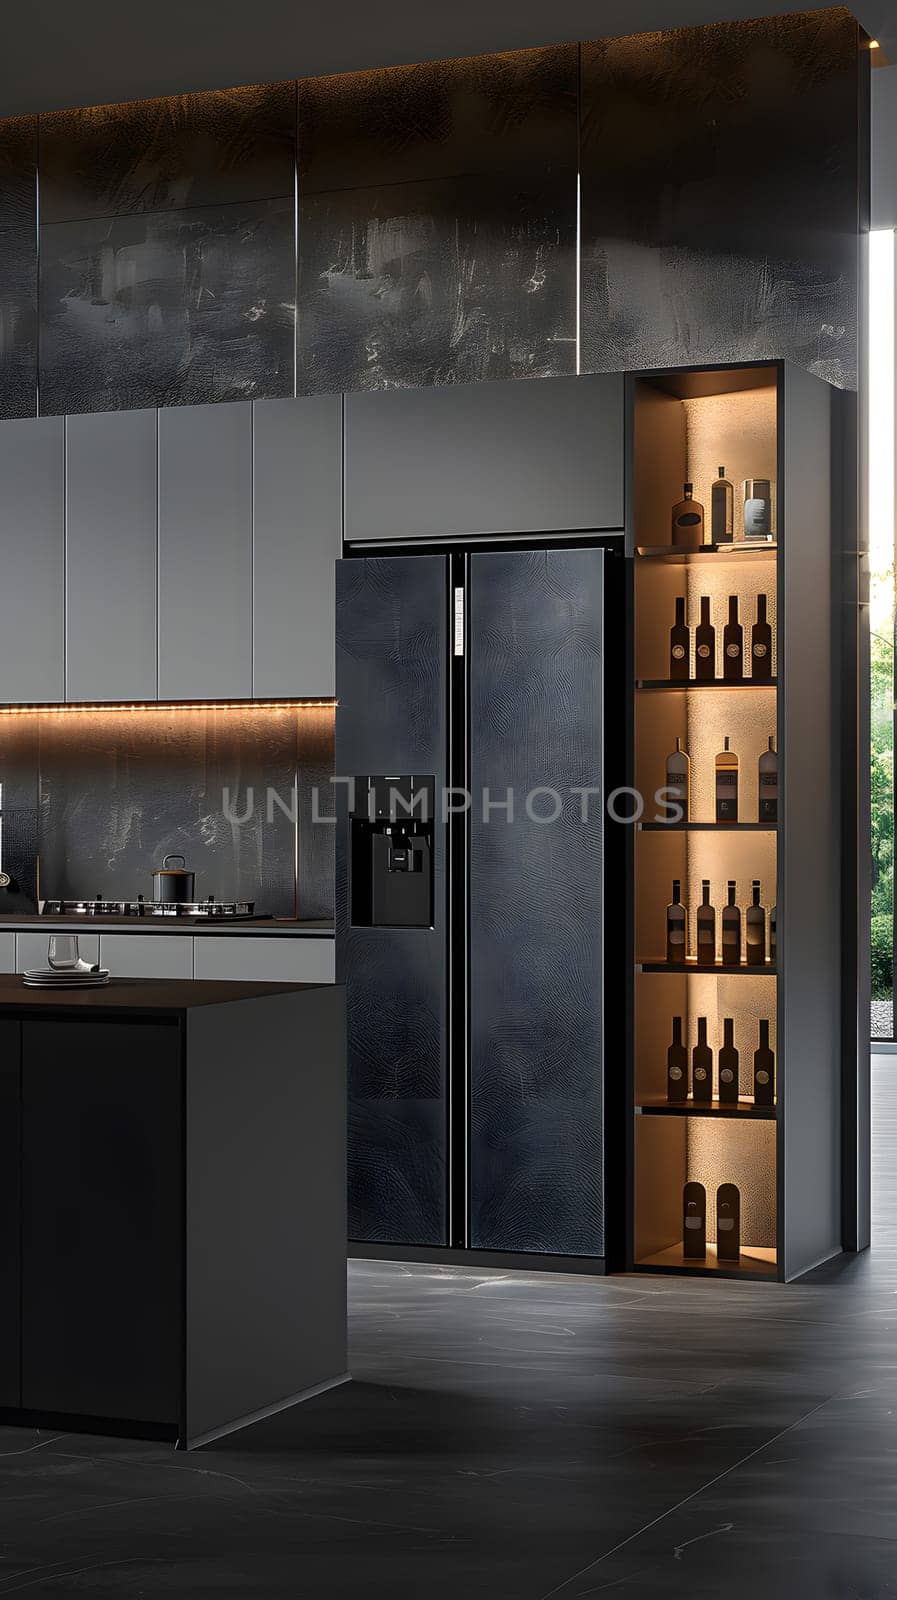 A kitchen with black cabinetry, a sleek refrigerator, and shelves filled with bottles. The modern fixtures complement the wood accents in the house